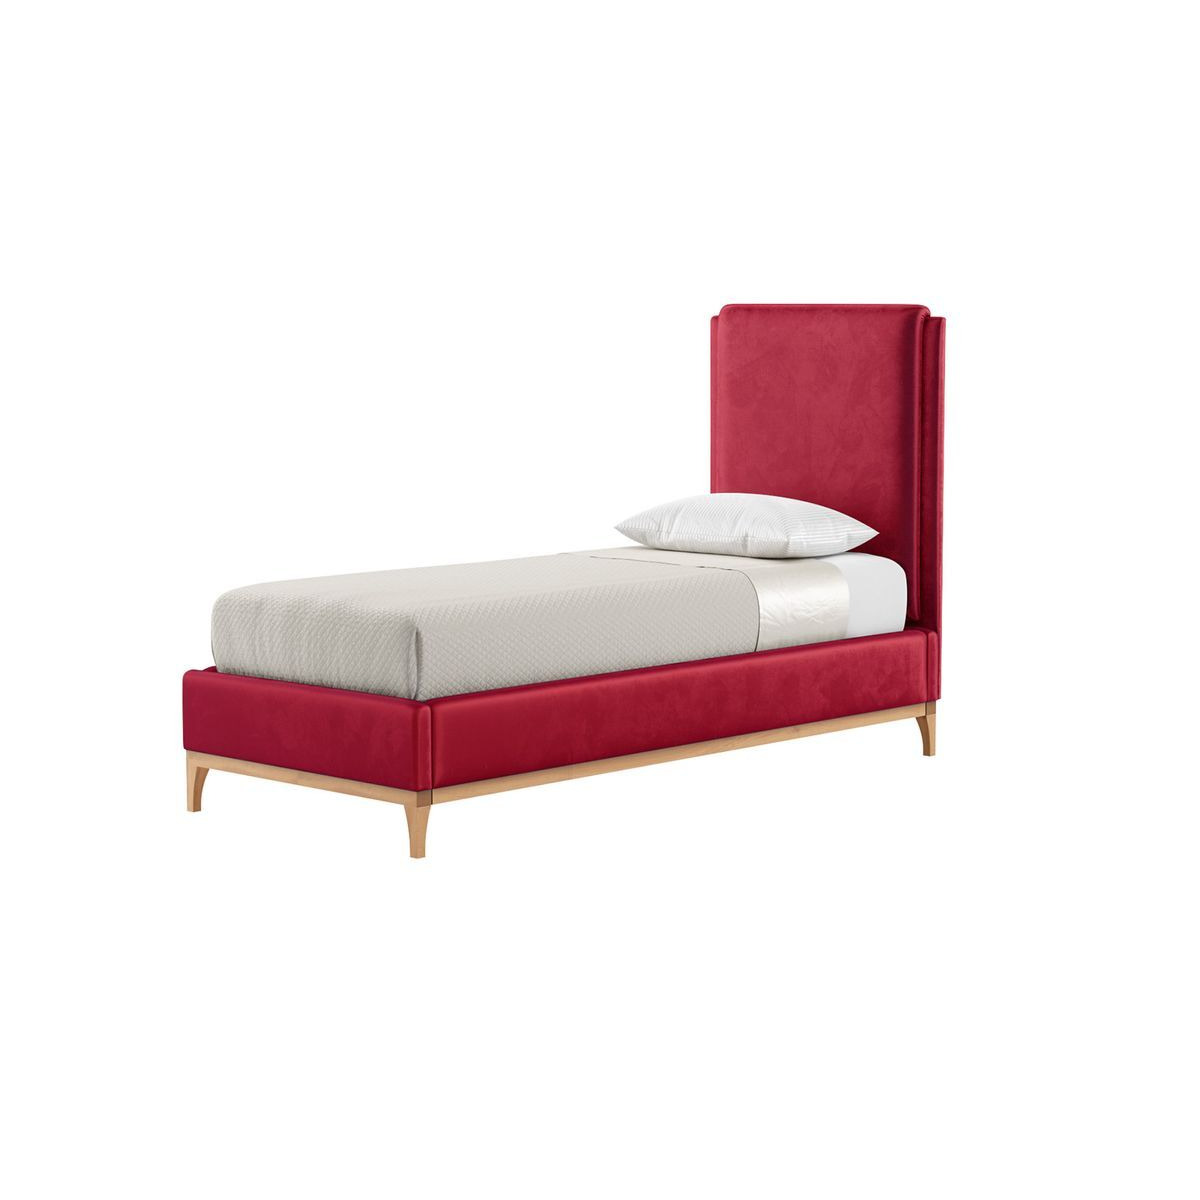 Emily 3ft Single Bed Frame with contemporary panel headboard, dark red, Leg colour: like oak - image 1